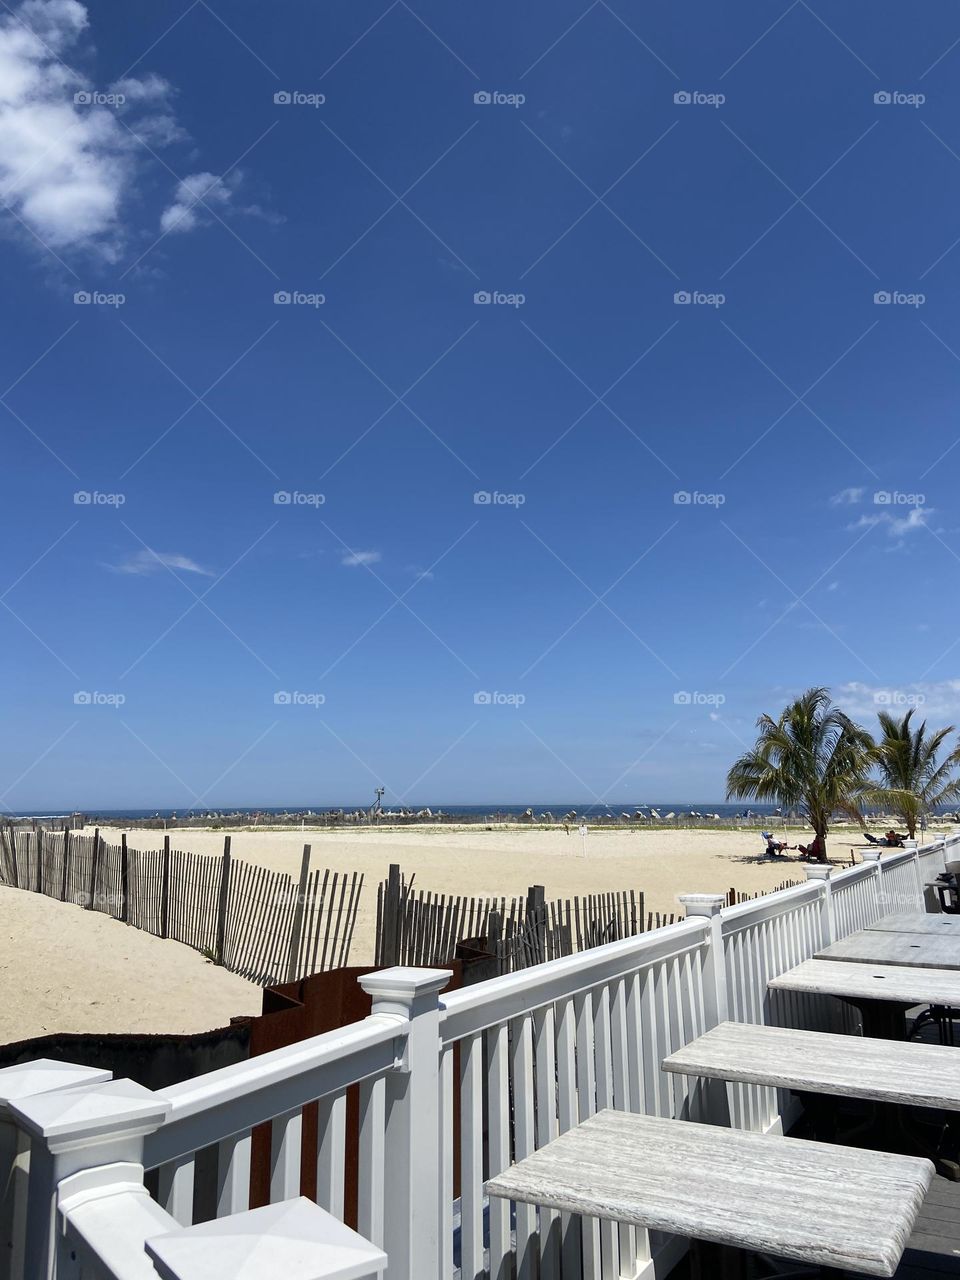 Bench fence forms a triangle of sandy beach with the ocean on one edge beneath bright blue sky. A little patch of summer paradise with people lounging beneath the palm trees in the distance. 